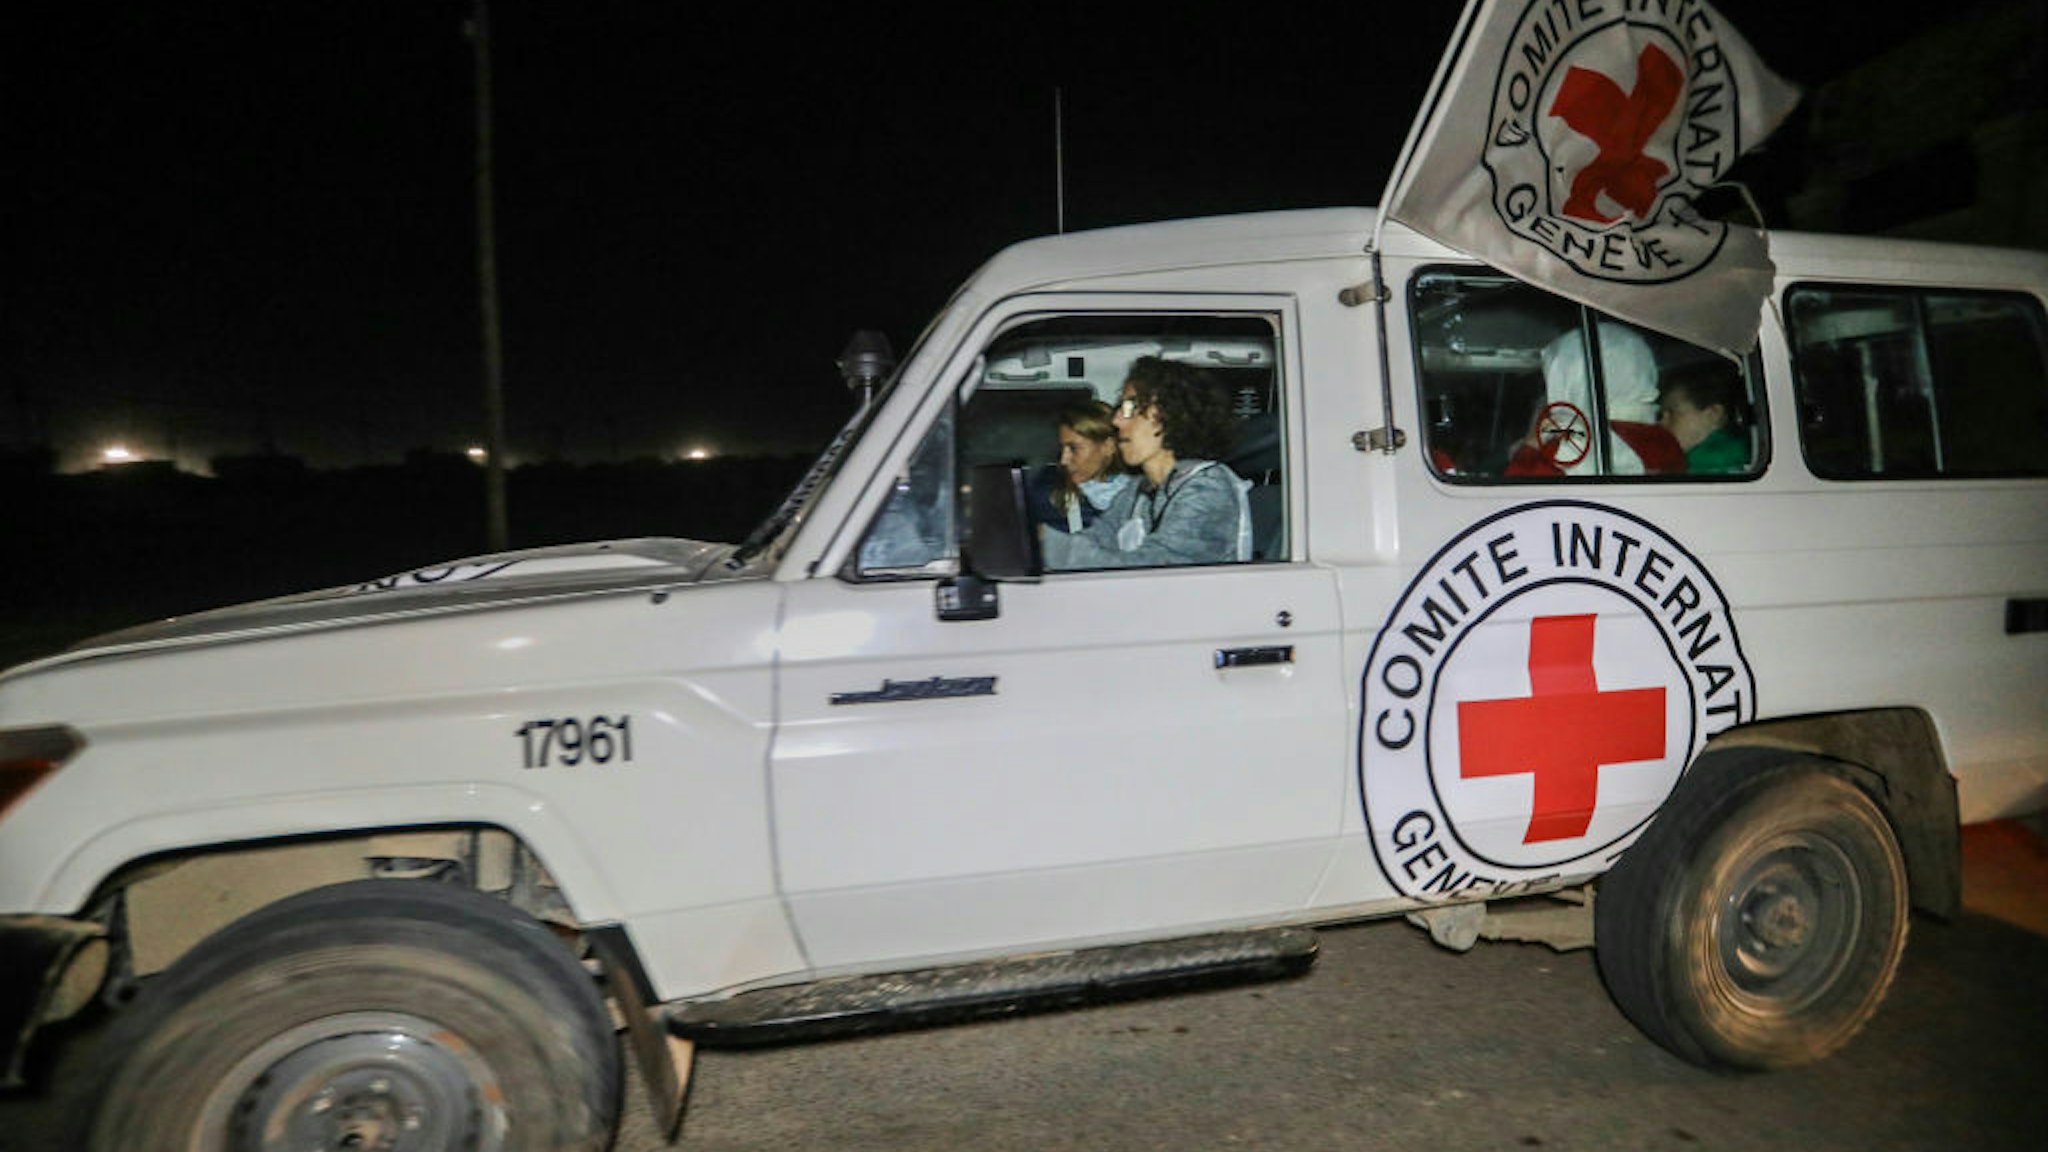 RAFAH, GAZA - NOVEMBER 30: Hostages are transported in International Committee of the Red Cross vehicles from the Gaza Strip through the Rafah land crossing on November 30, 2023 in Rafah, Gaza. Israel and Hamas agreed to a further extension to a truce that has lasted nearly a week, which promised the release of more Israeli hostages held in Gaza, as well as the release of Palestinian prisoners held in Israeli jails. (Photo by Ahmad Hasaballah/Getty Images)